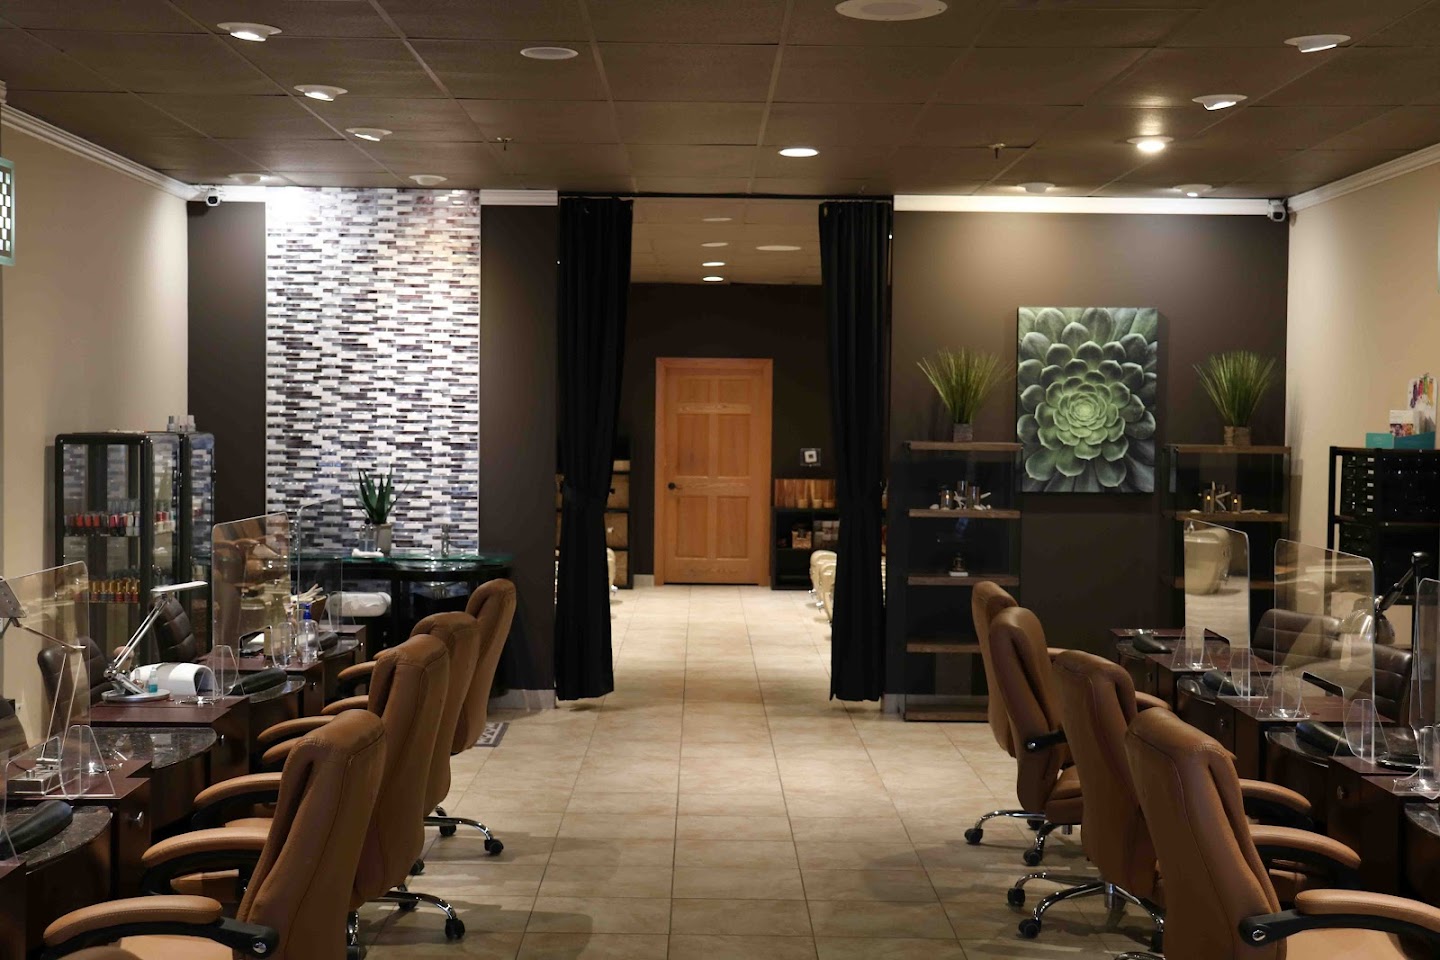 Roseville Nail Spa - wide 8